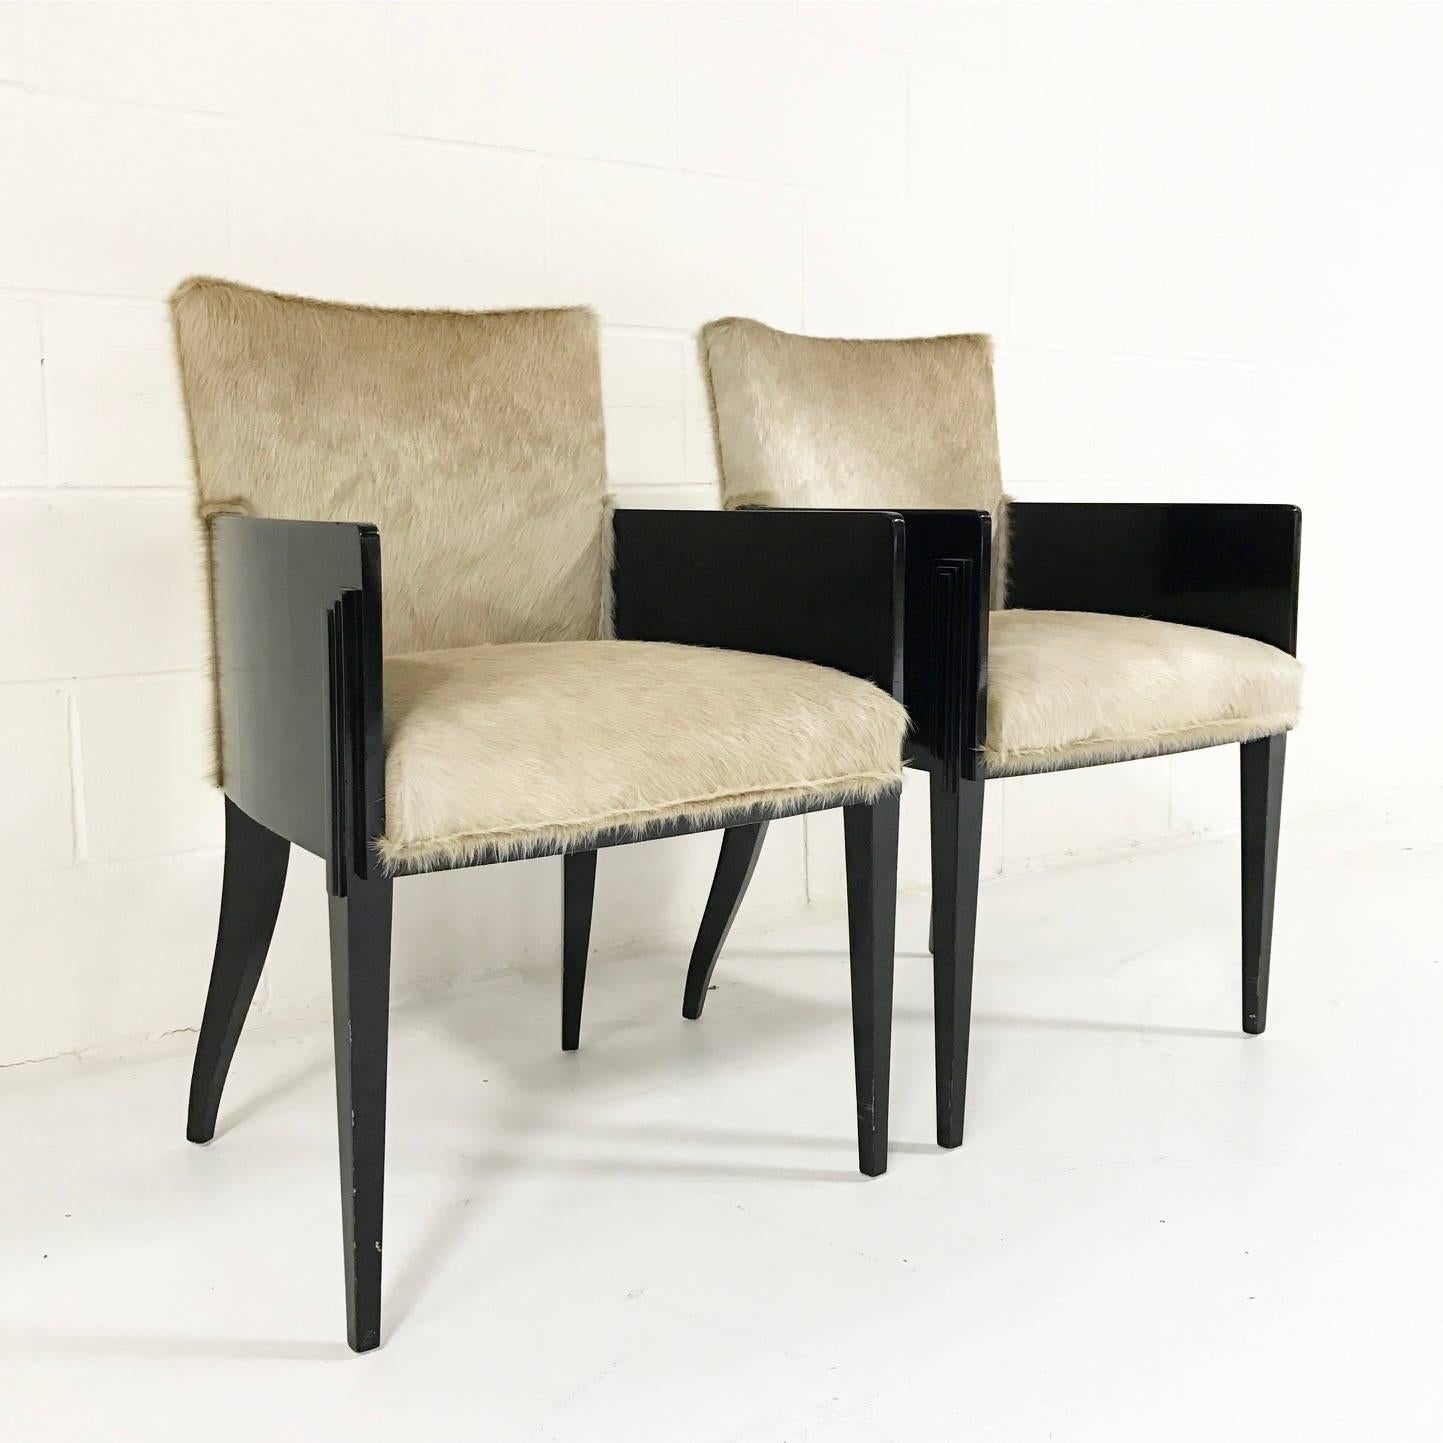 We love the color combination of khaki and black. So elegant. We collected these darling Art Deco style side chairs for their perfect Silhouette, those slanted legs! And we adore the juxtaposition of the slick and shiny high gloss black with the